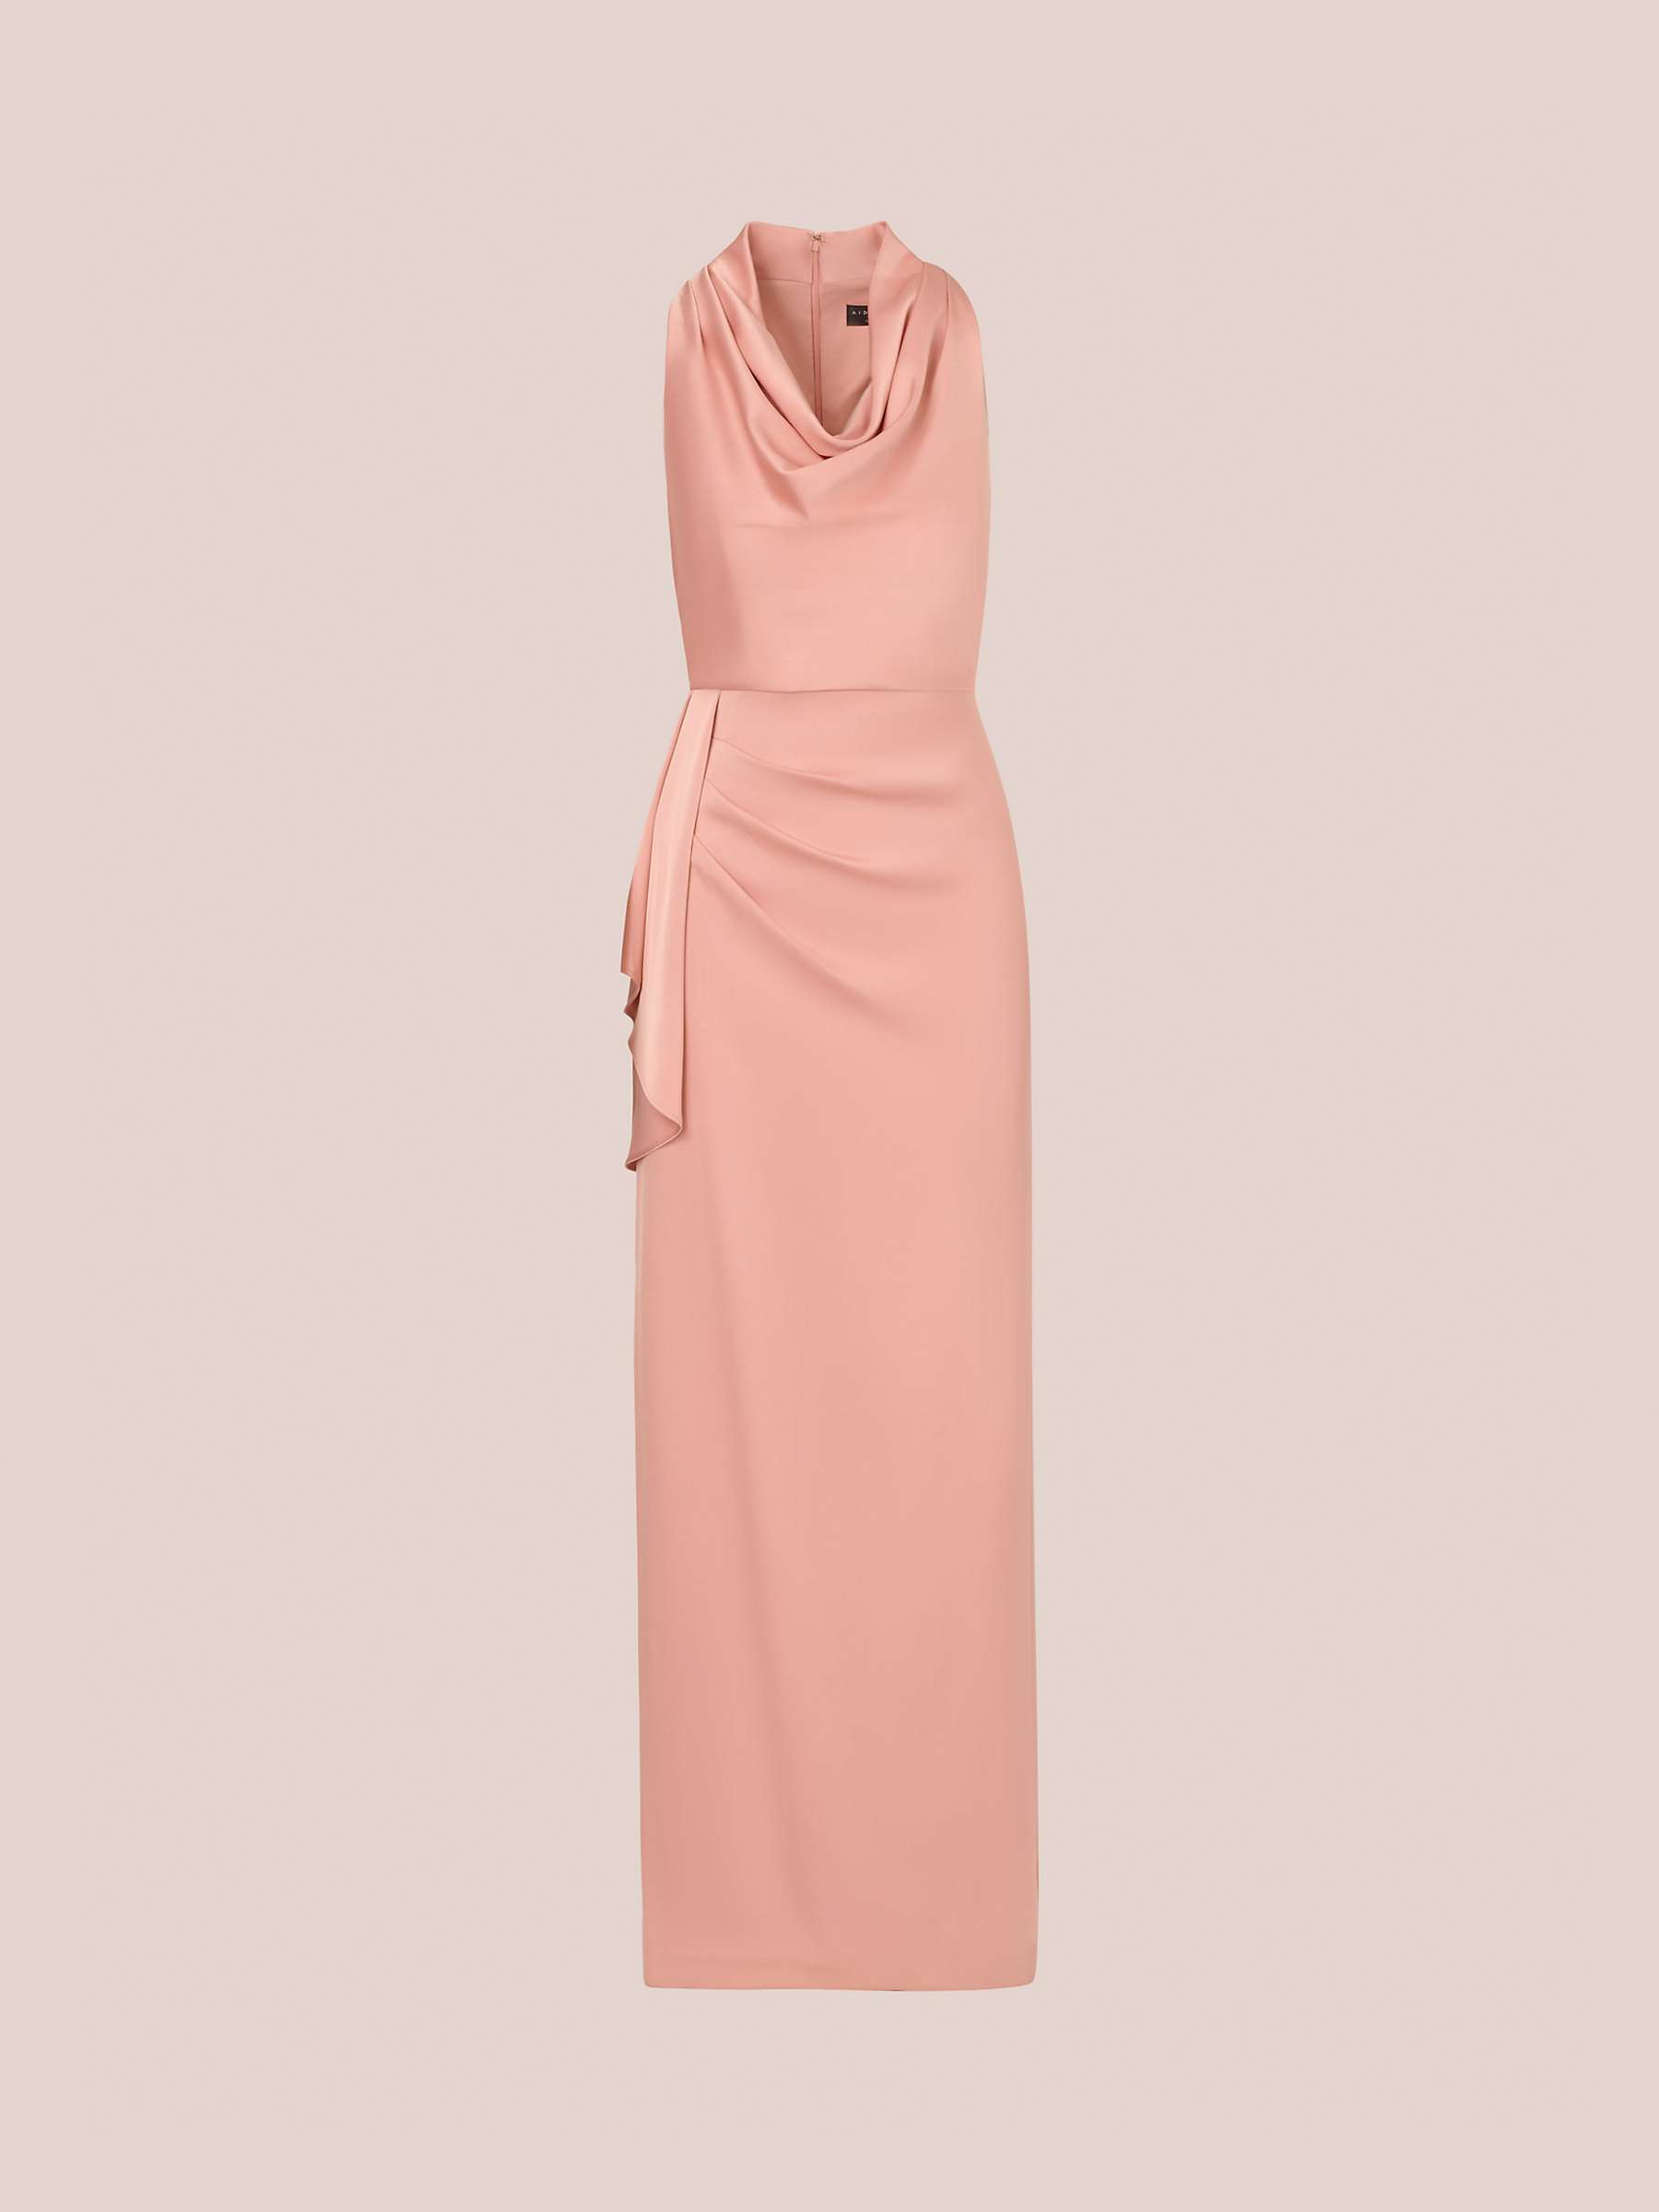 Buy Aidan Mattox by Adrianna Papell Crepe Back Satin Dress, Champagne Rose Online at johnlewis.com